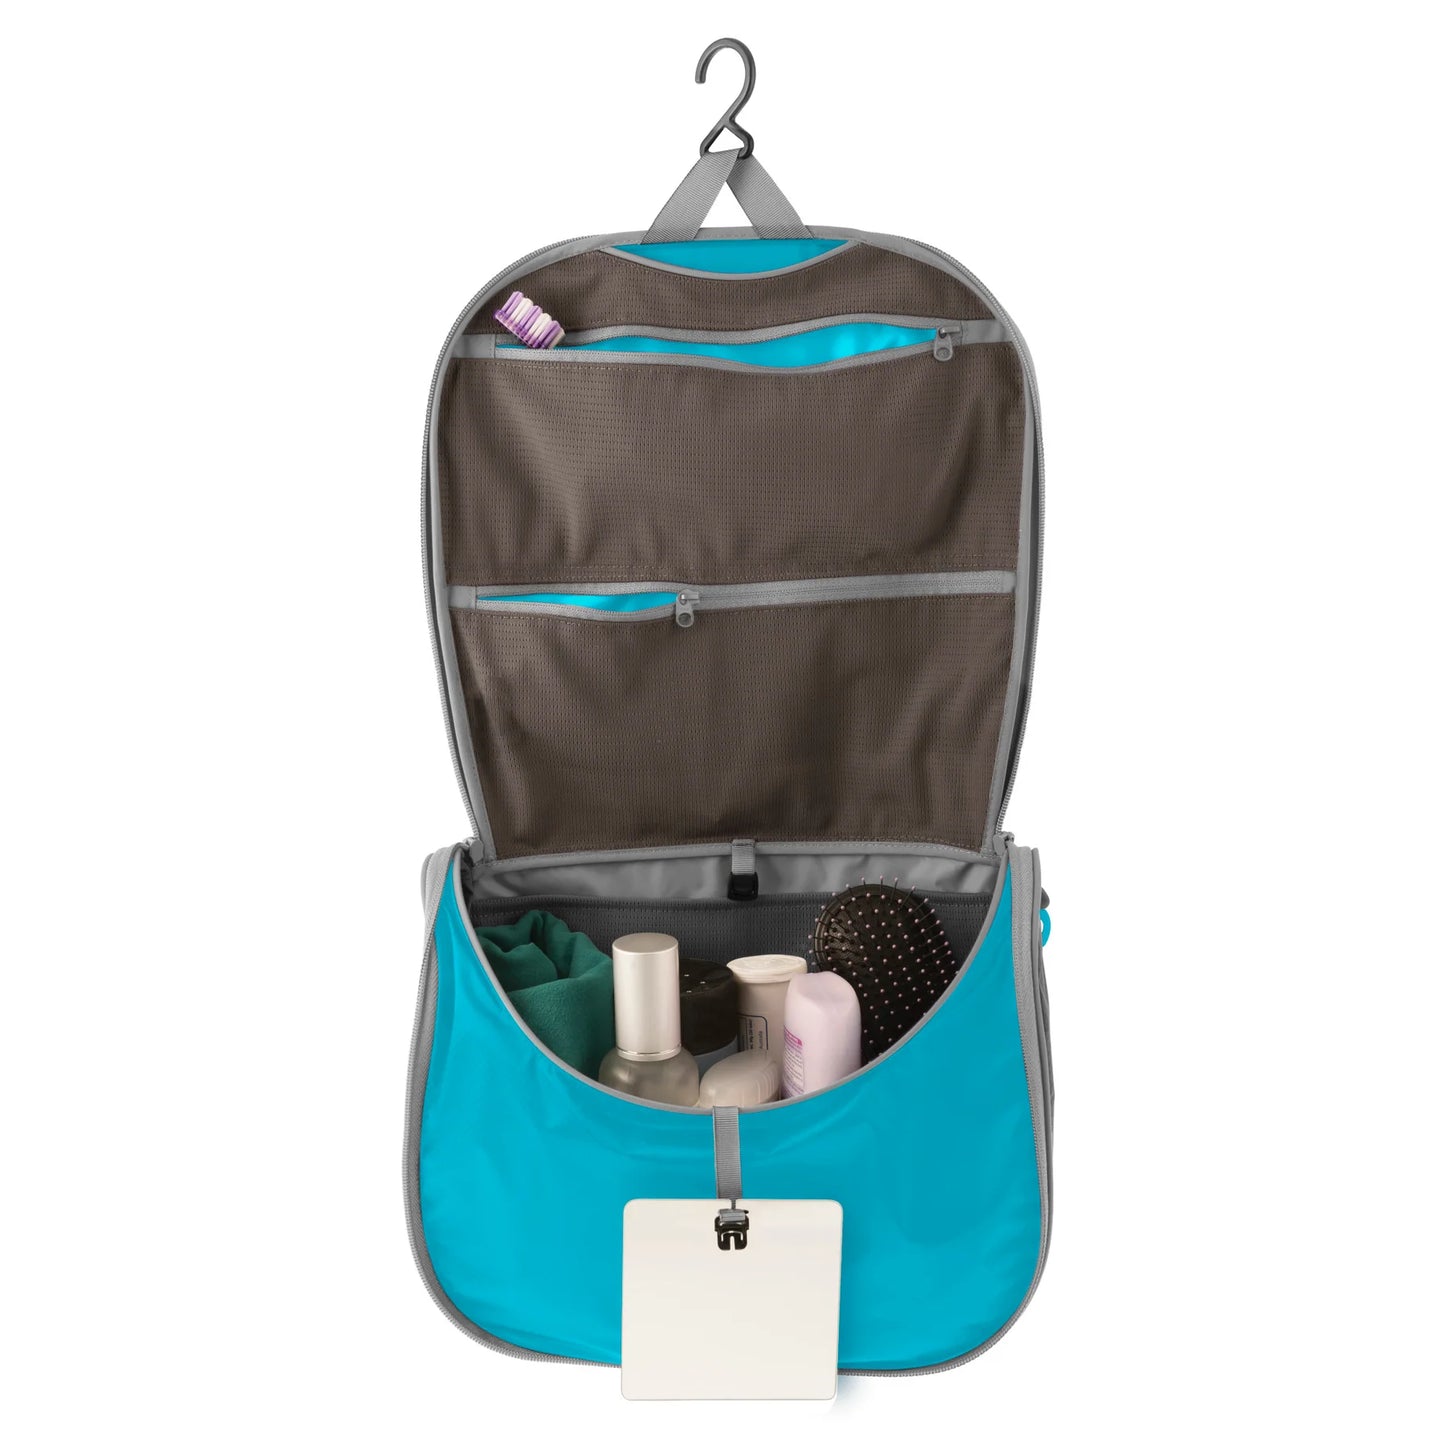 SEA TO SUMMIT HANGING TOILETRY BAG